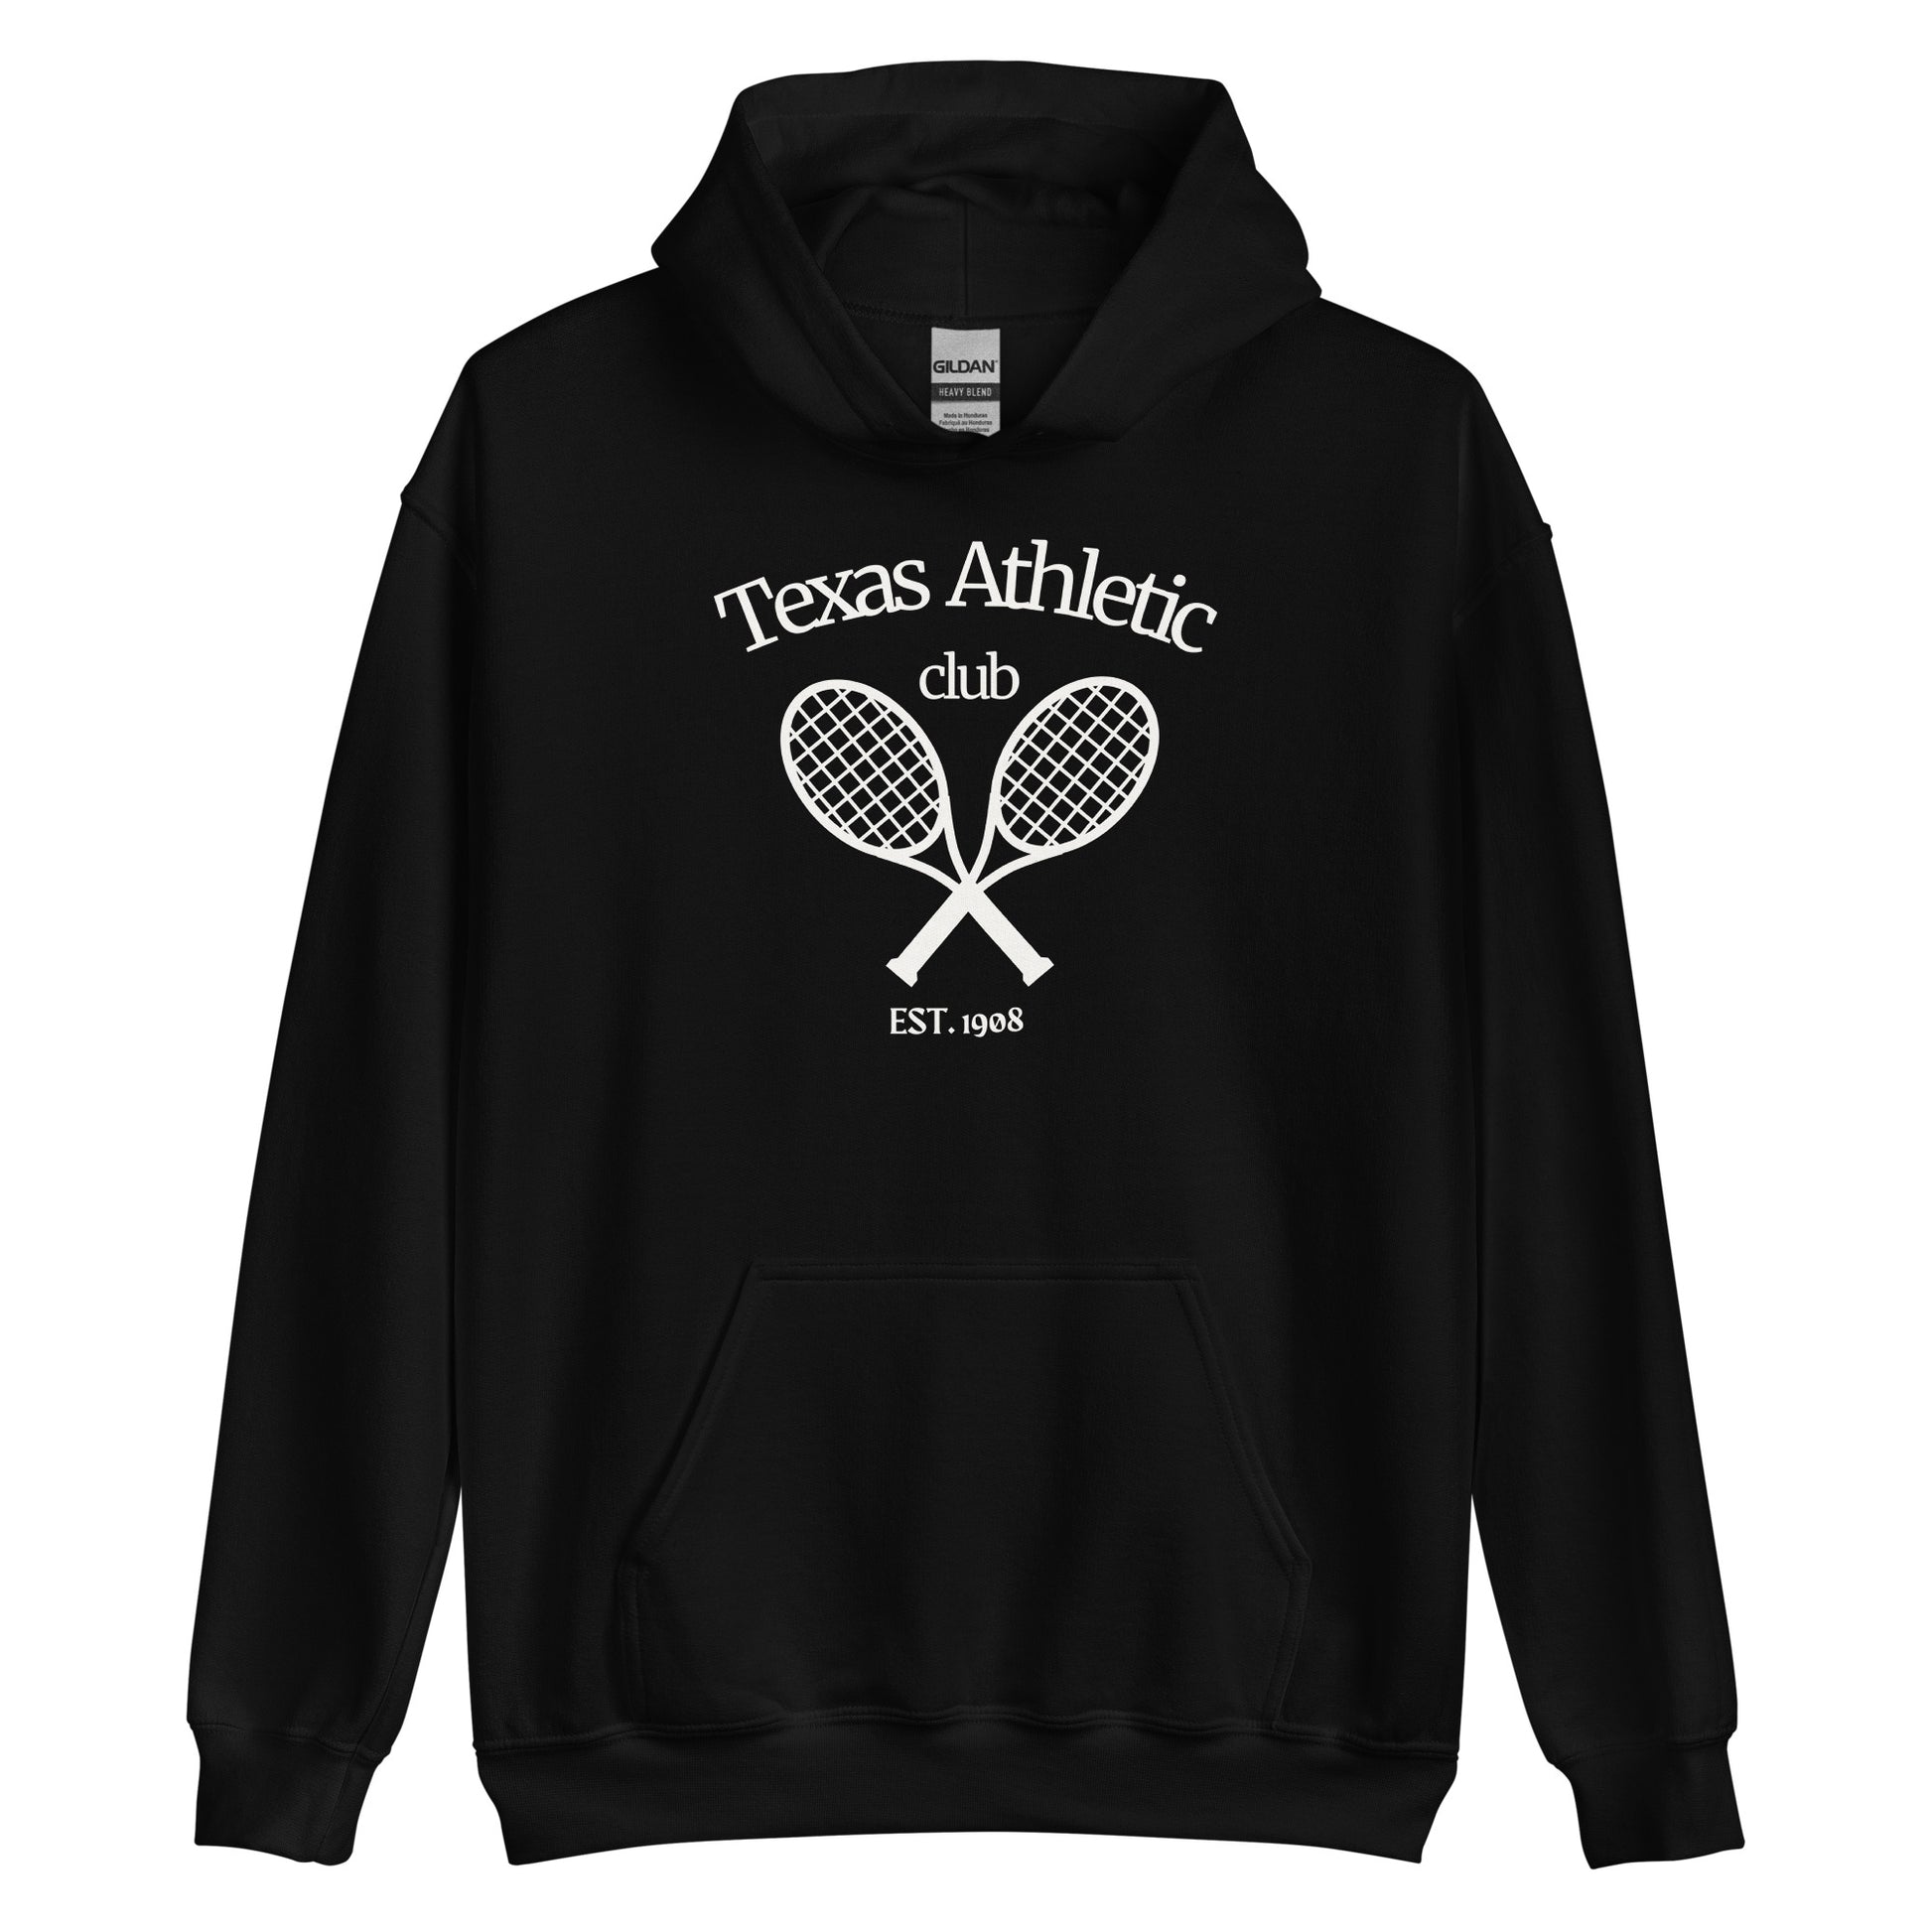 Black hoodie with white 'Texas Athletic Club' text and crossed tennis rackets graphic, front pouch pocket, ribbed cuffs and hem, displayed on a plain background.